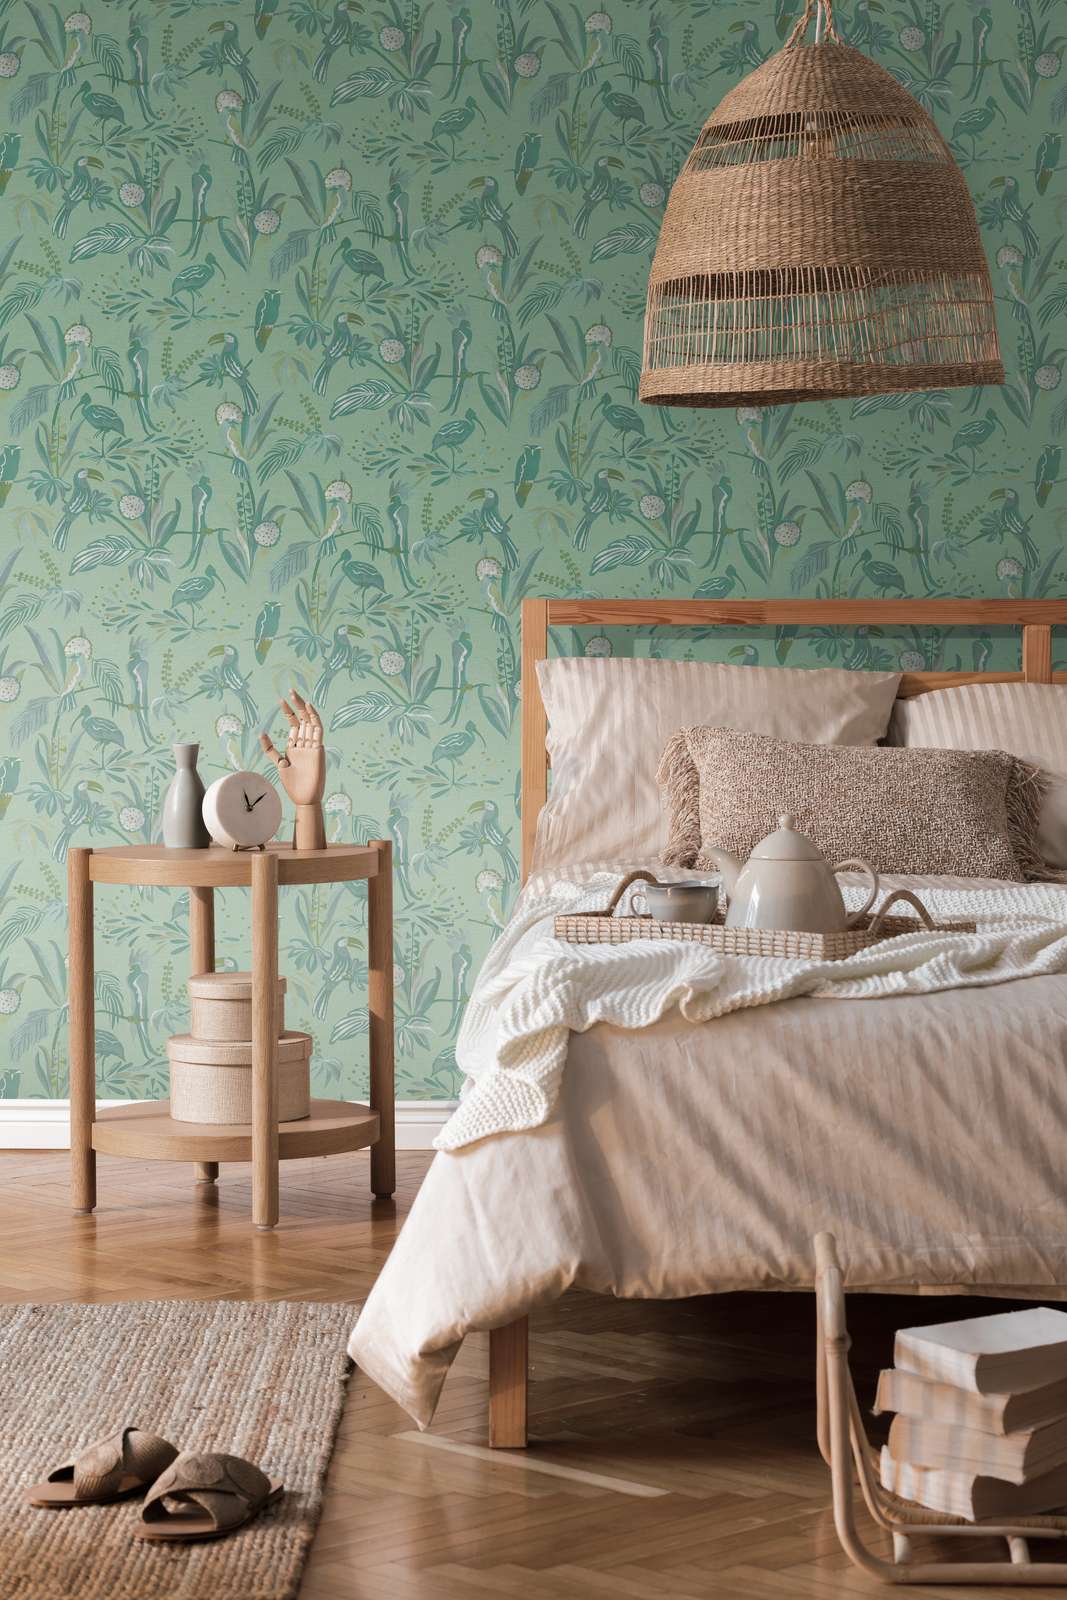             Non-woven wallpaper with jungle motif leaves & birds - green, grey
        